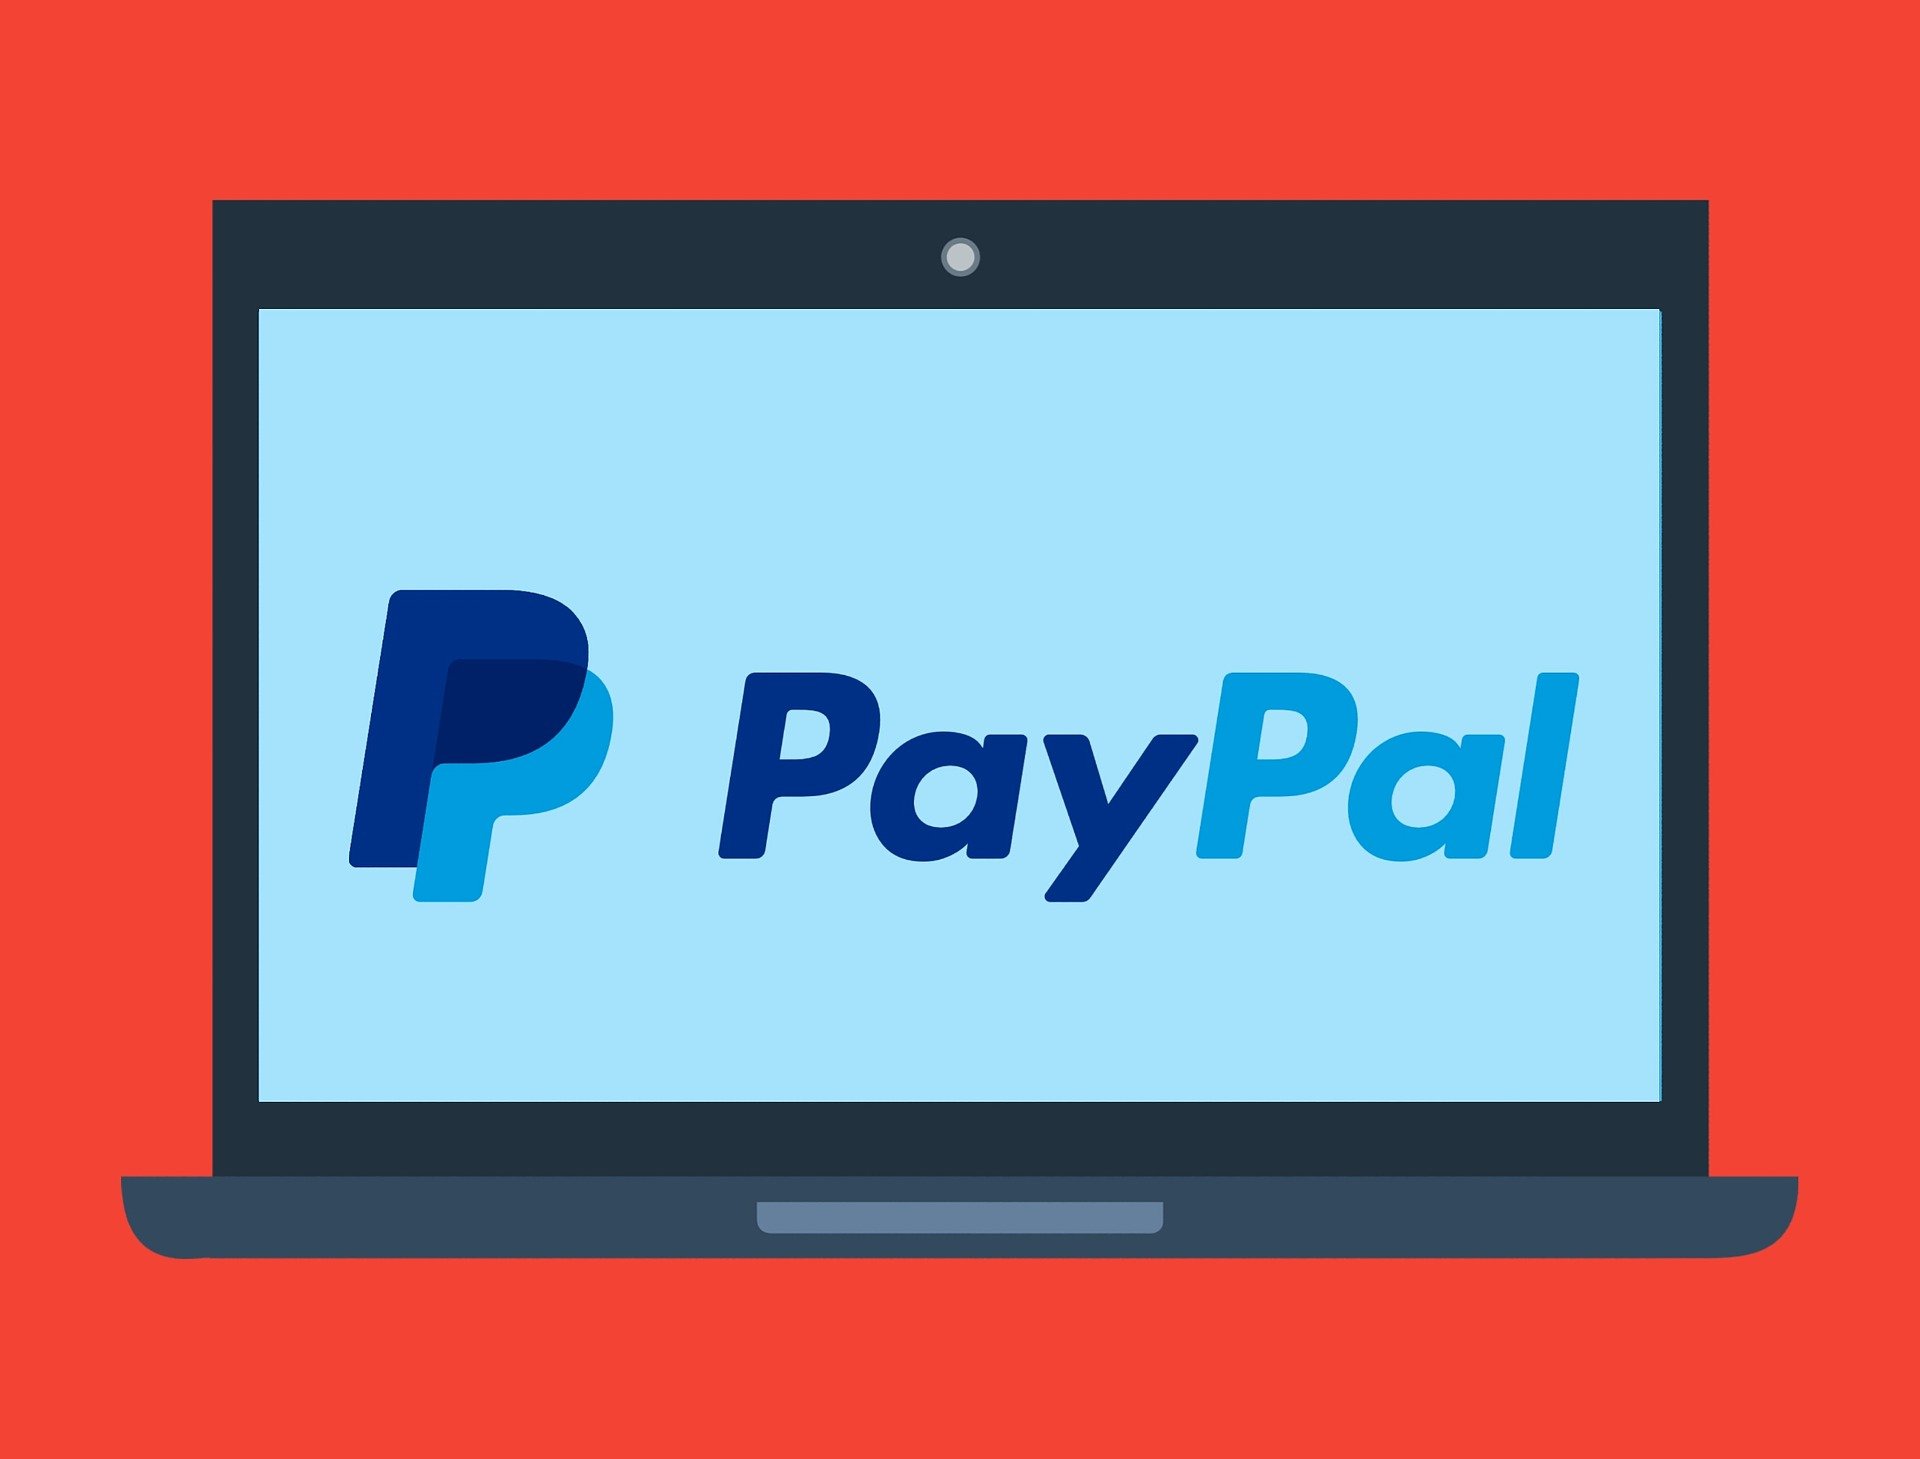 How to close a Paypal account after a loved one passes — Peacefully